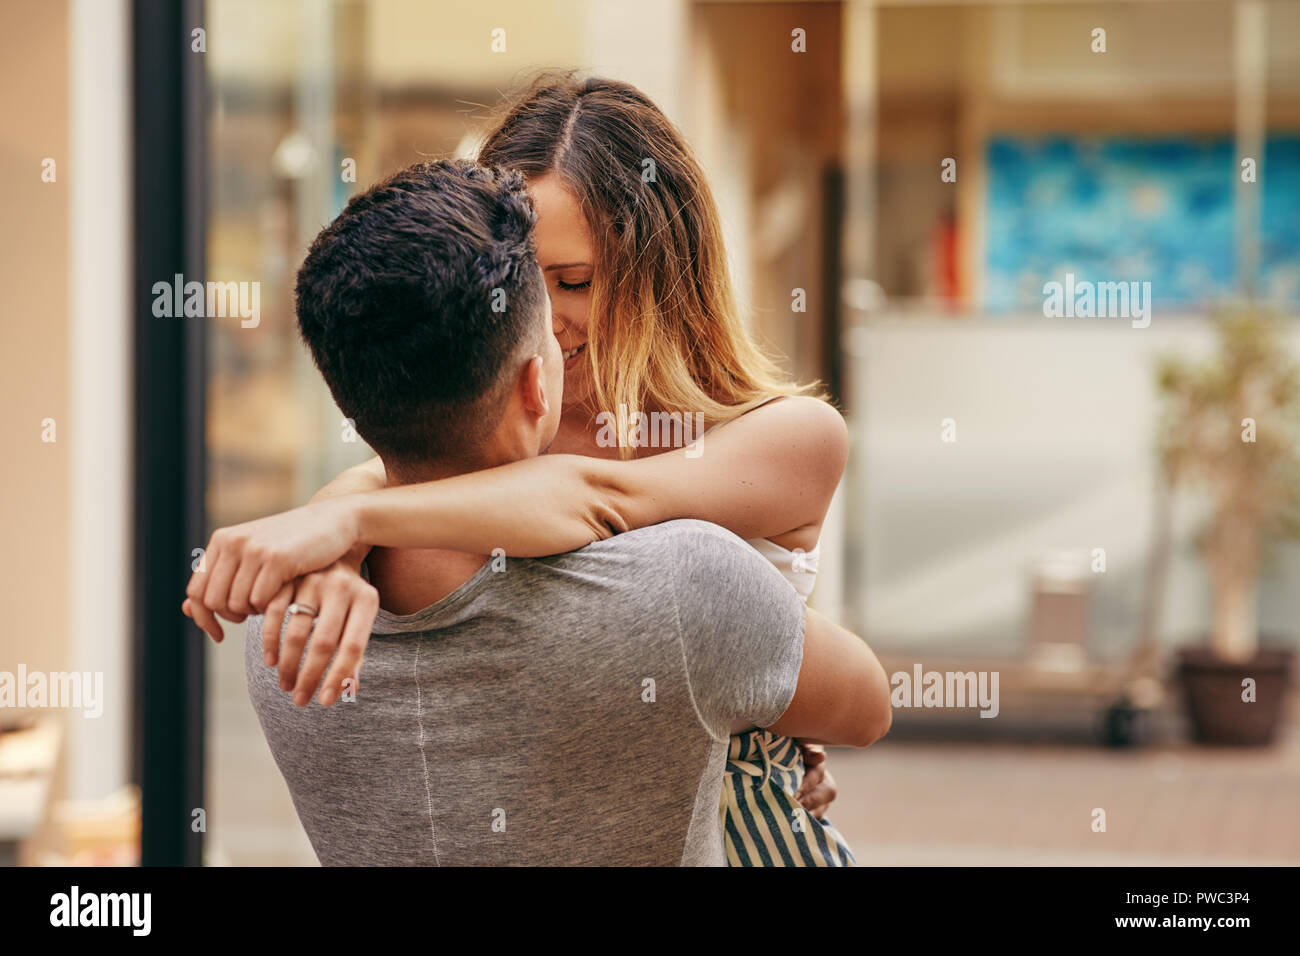 Affectionate young couple embracing and sharing a romantic kiss while standing together on a street in the city Stock Photo